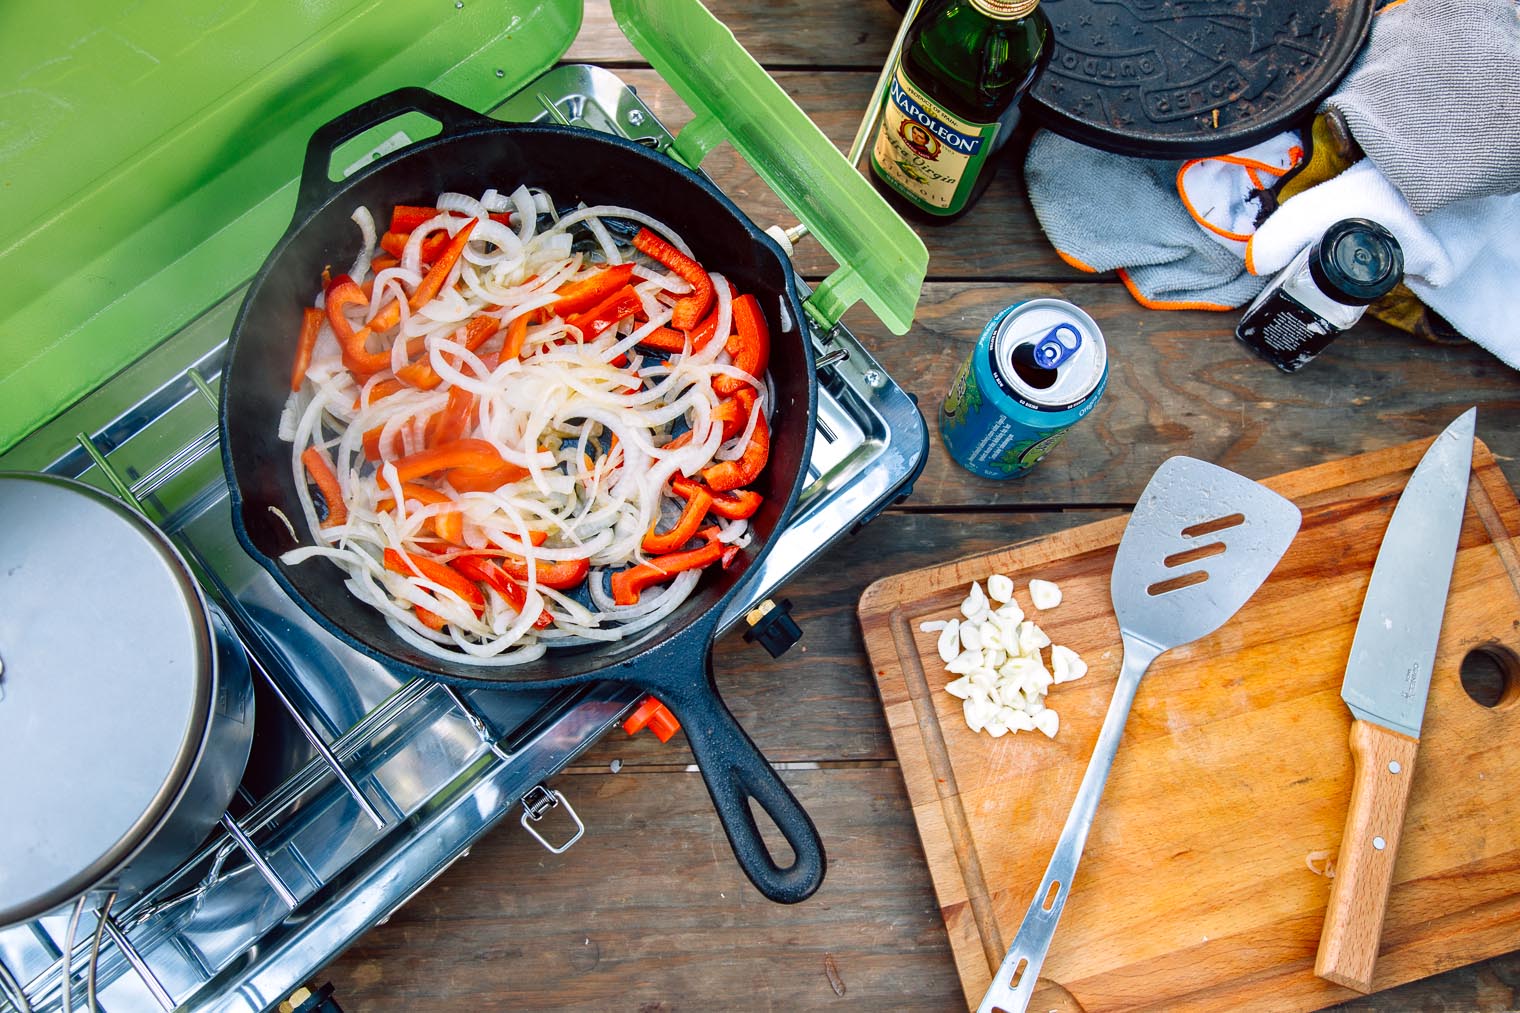 Onions and red bell peppers cooking in a cast iron skillet over a camping stove